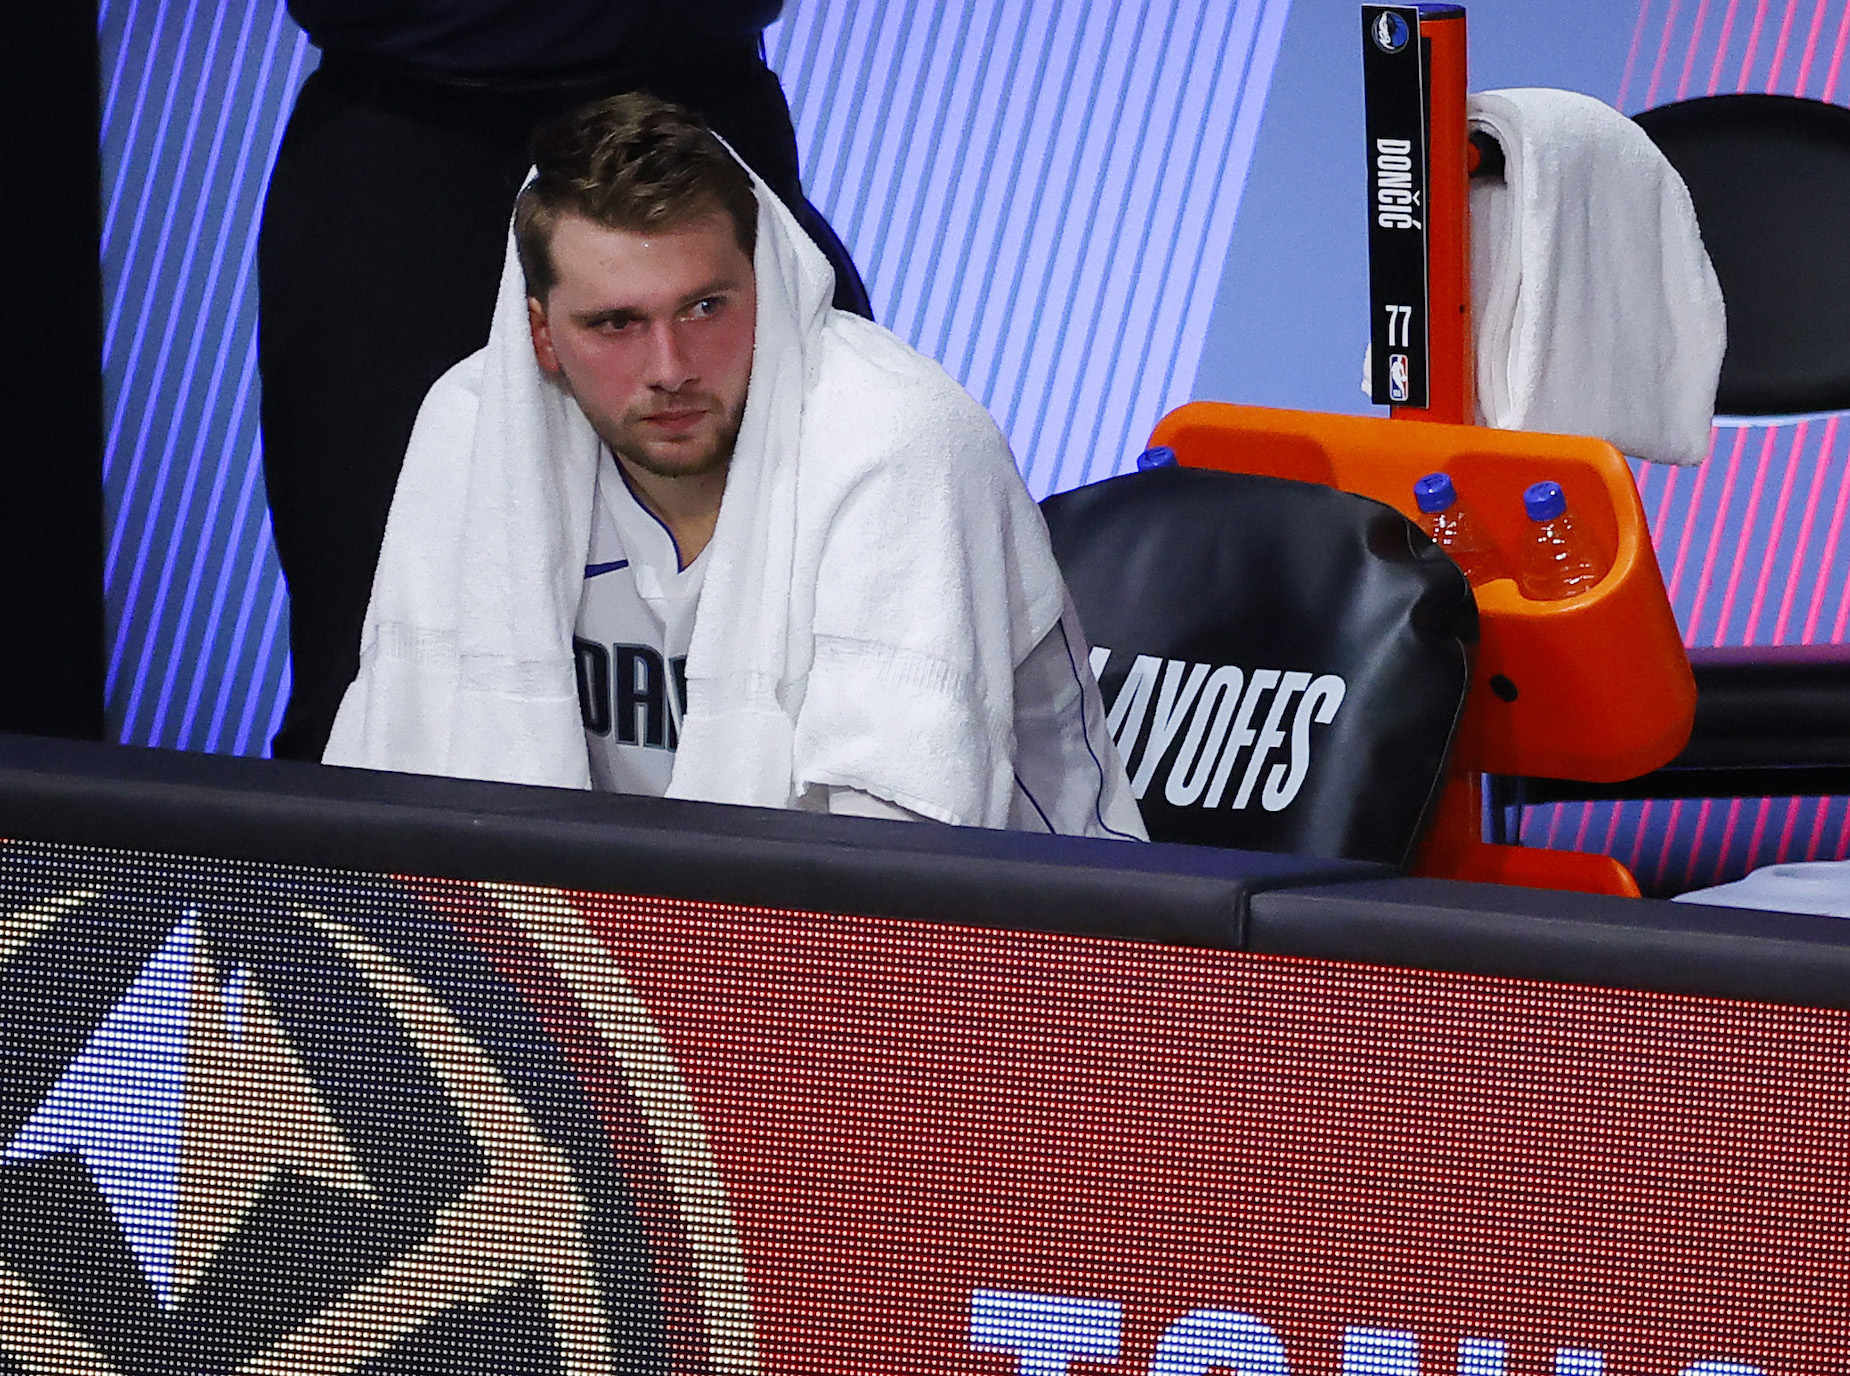 Luka Doncic believes improving his shot is key for the 2020-21 NBA season.